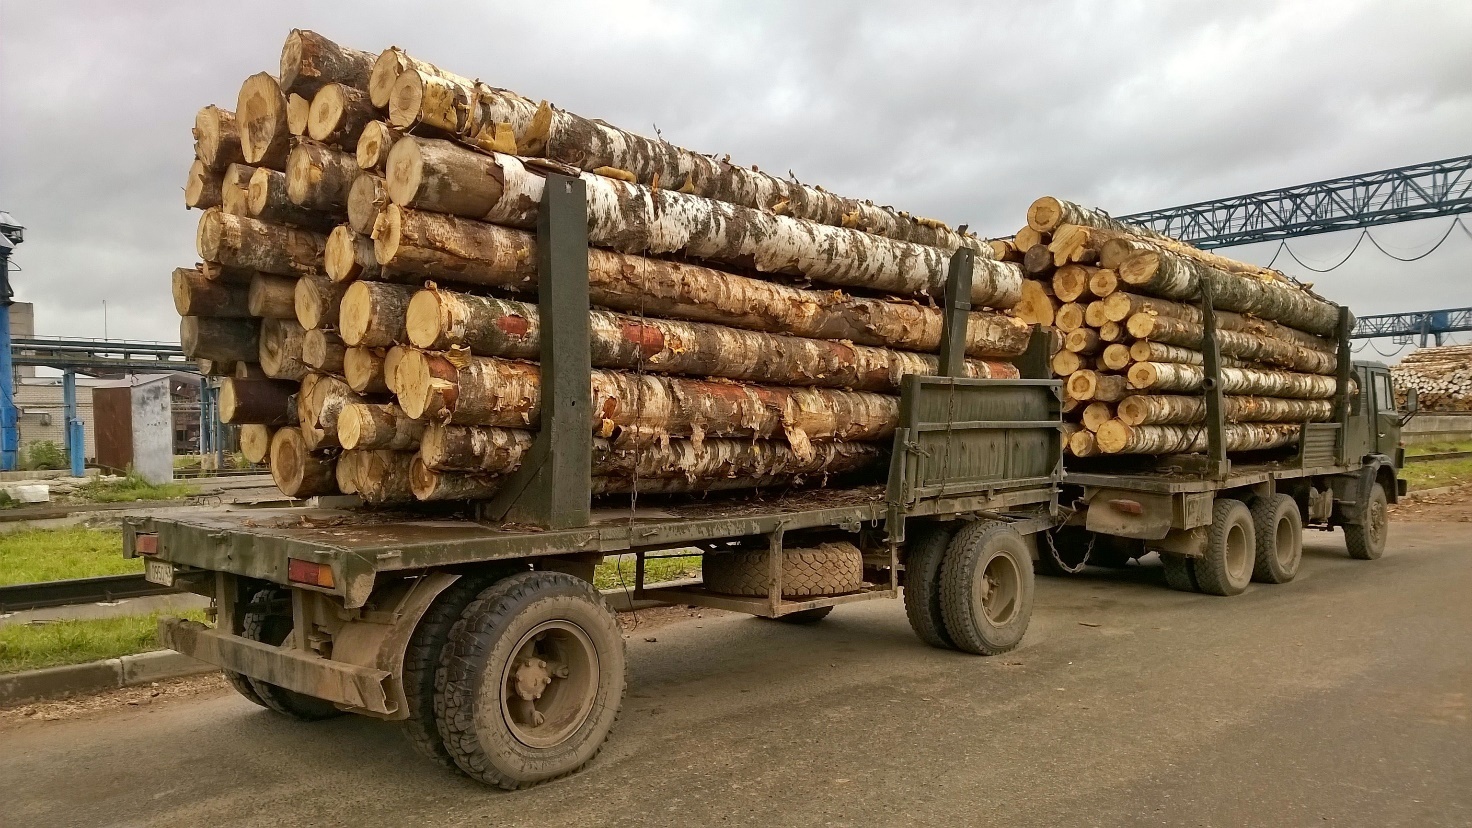 Russia’s Proposed Roundwood Export Ban Would Impact Global Trade